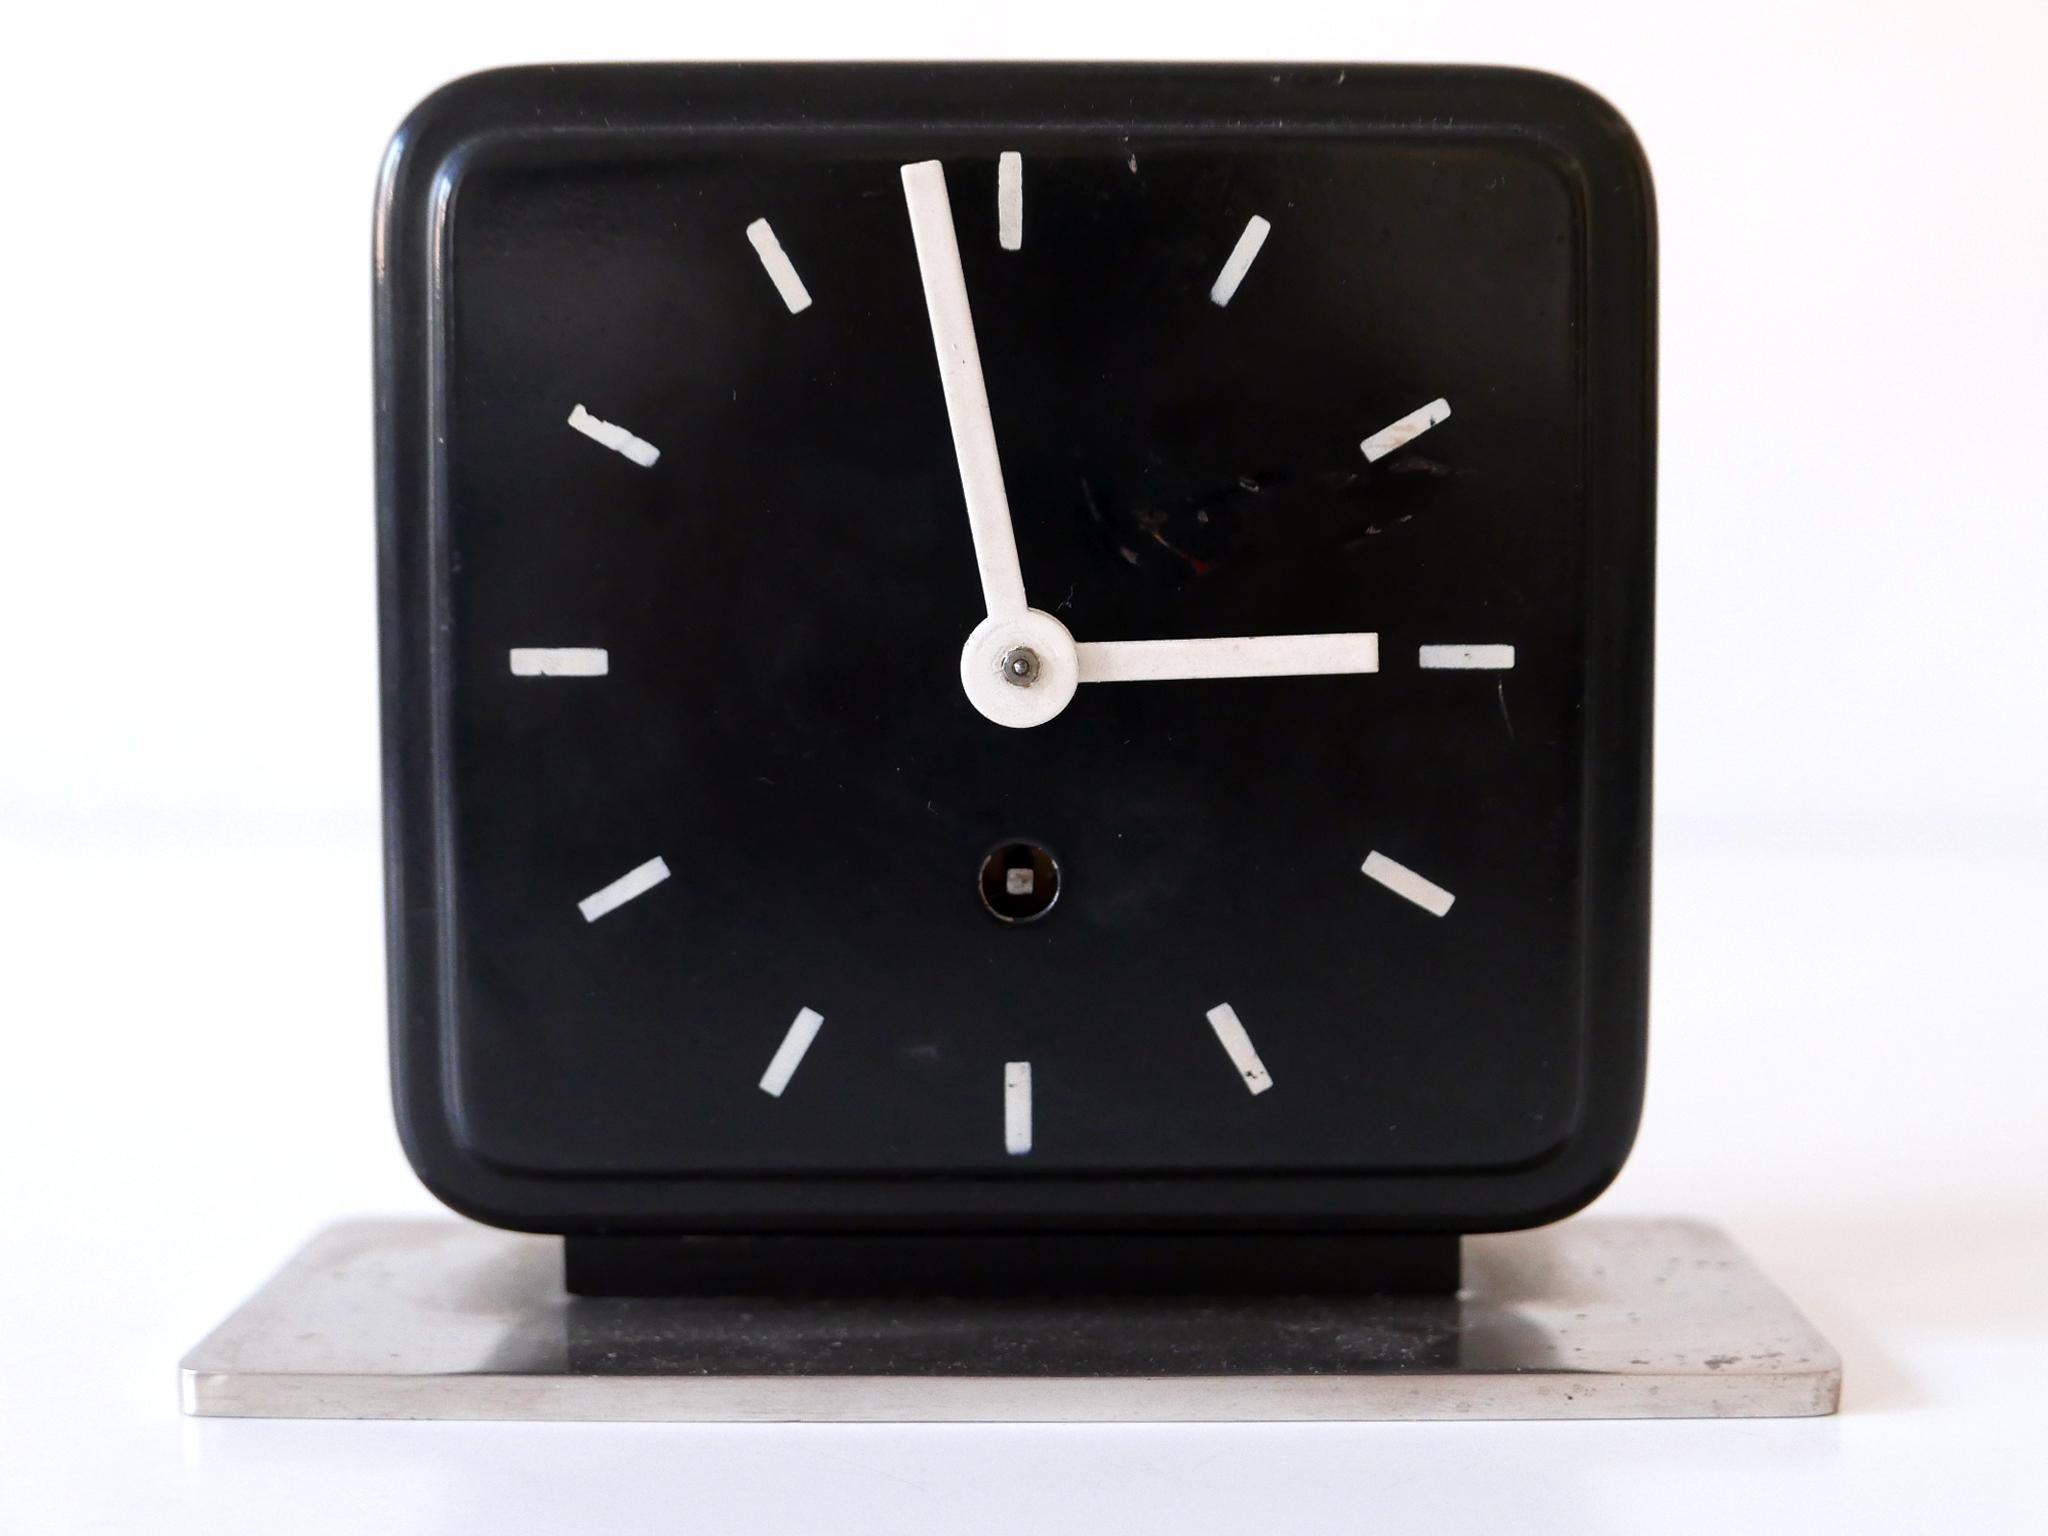 Mid-20th Century Bauhaus Table or Desk Clock by Marianne Brandt for Ruppelwerk Gotha Germany 1932 For Sale